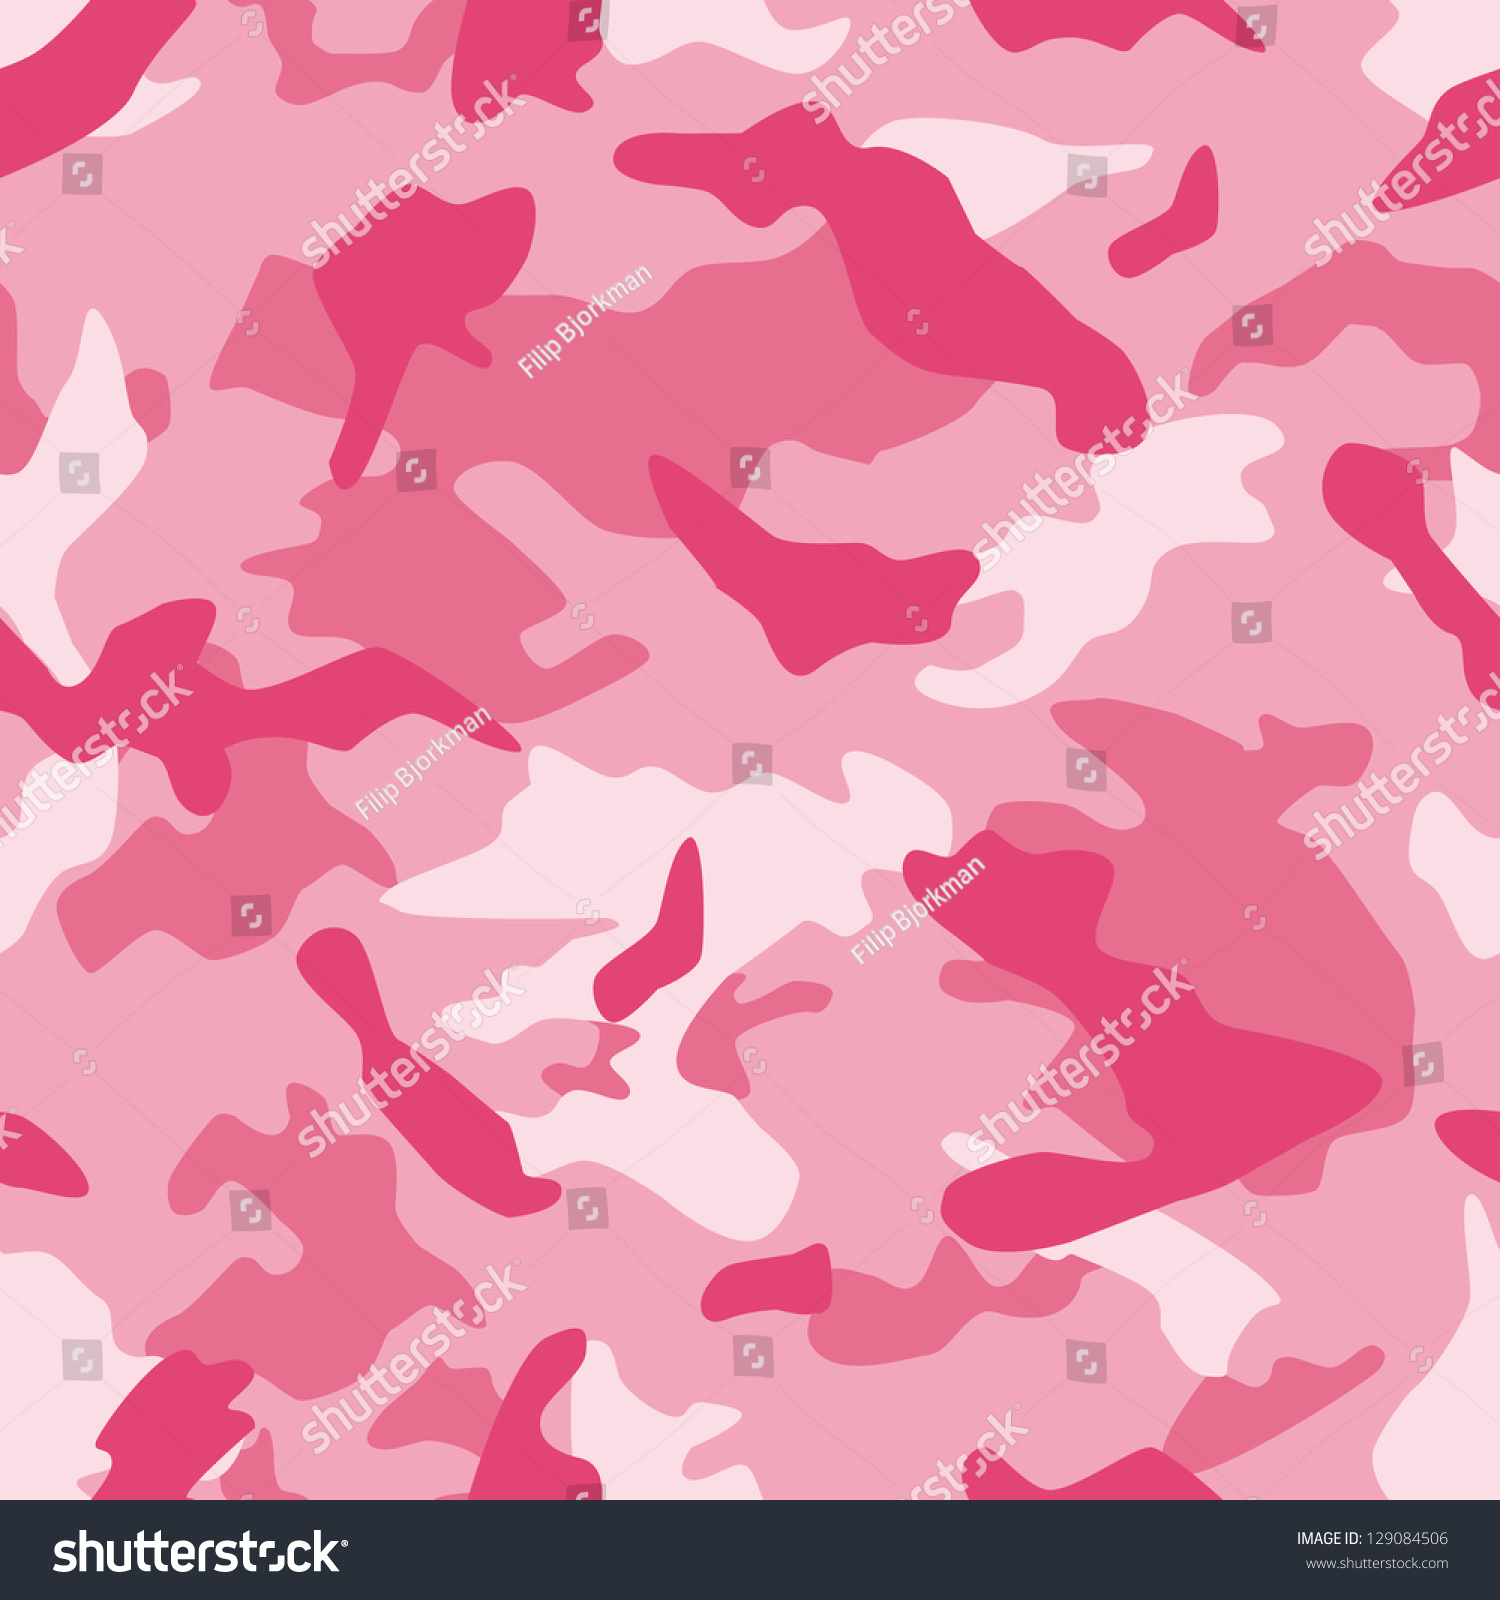 Seamless Vector Square Camouflage Series In The Pink Scheme - 129084506 ...